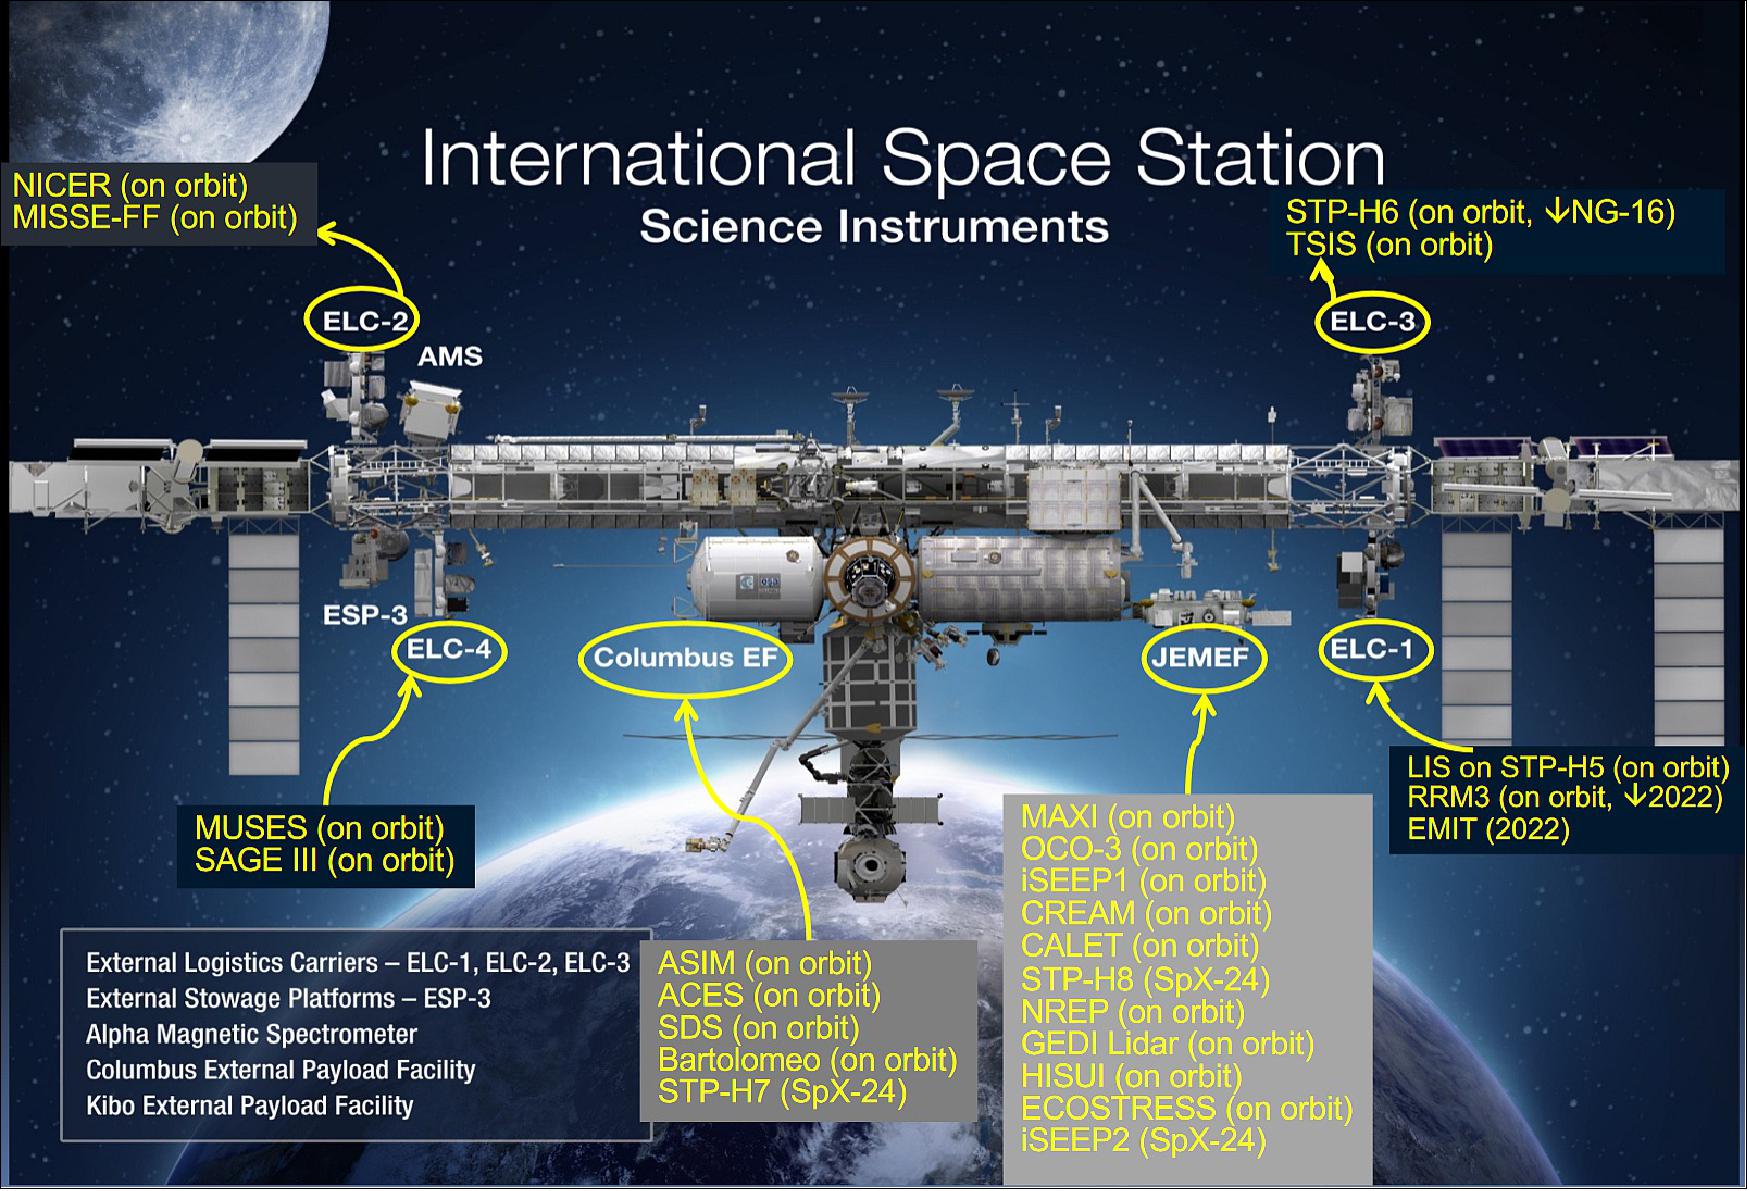 Figure 1: Overview of current and future External Payloads on the ISS (image credit: NASA/LaRC) 2)